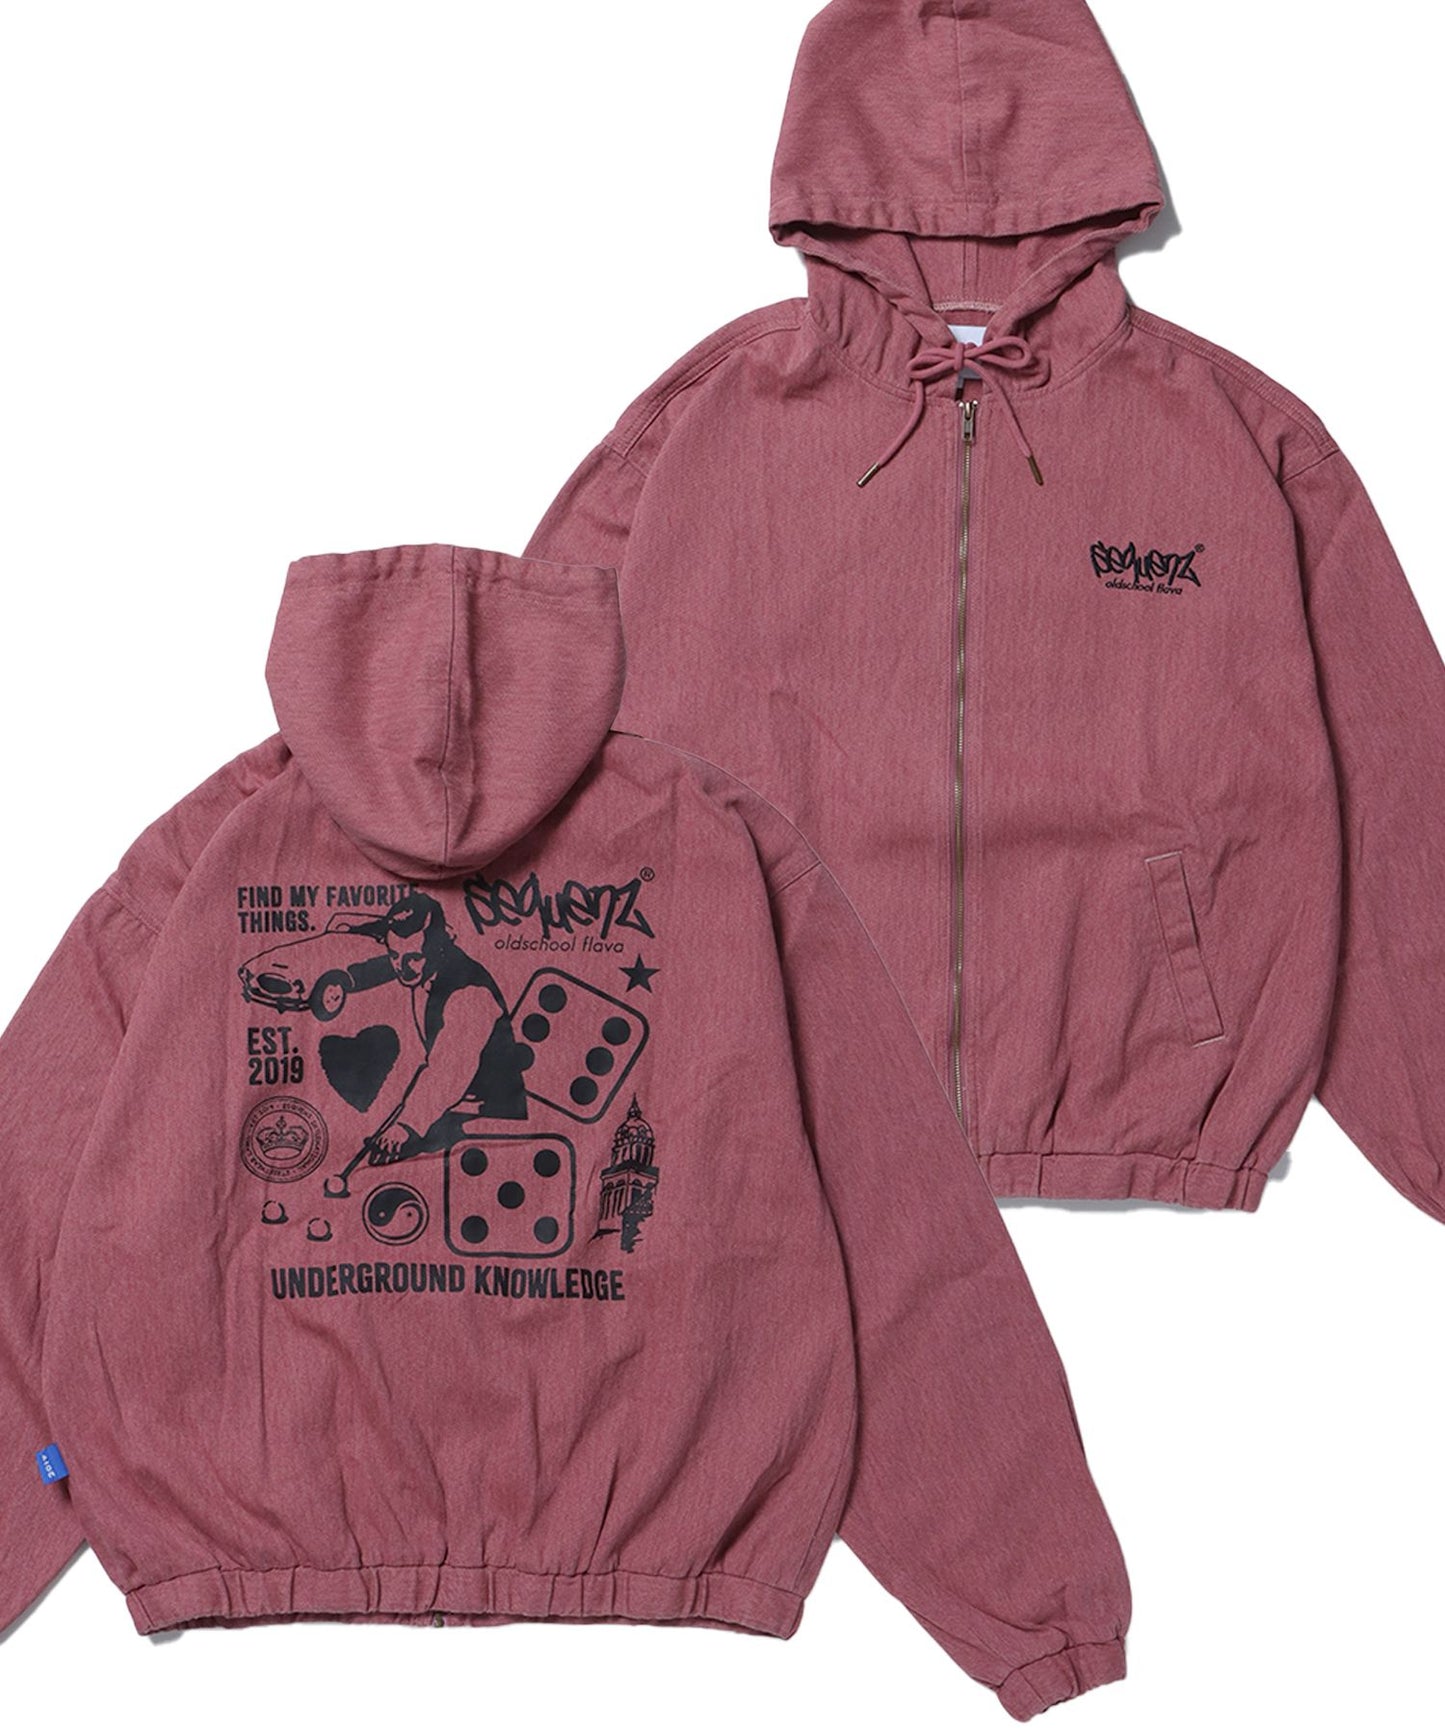 【SEQUENZ】COLLAGE OVERDYE TWILL HOODIE / ロゴ ビッグ スウェット ジップパーカー モノトーン ダイス ハート ストリート≪SET UP着用可能≫ ピンク